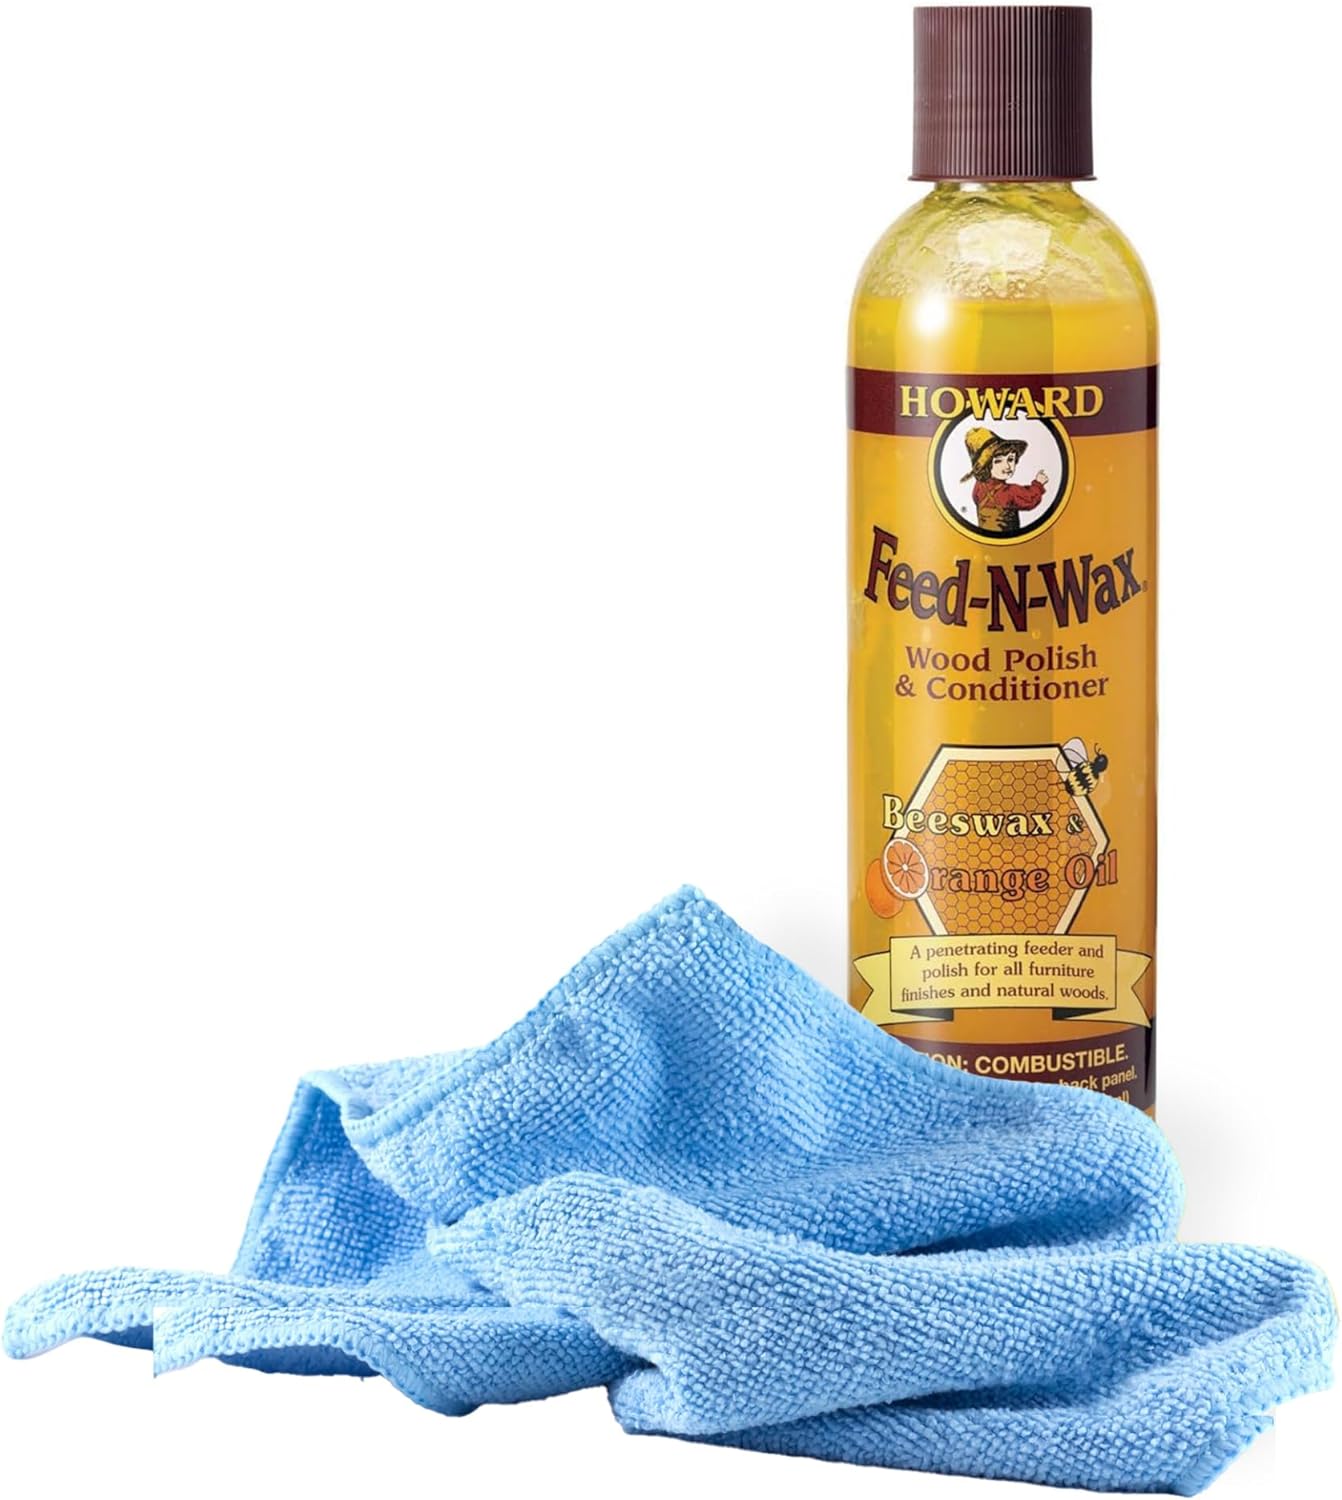 Black Swan Distributors - Howard Feed-N-Wax Wood Polish & Conditioner (8 oz) & Non-Abrasive, Washable Microfiber Cleaning Cloth (15x15 in) - Beeswax & Orange Oil - For All Furniture Finishes